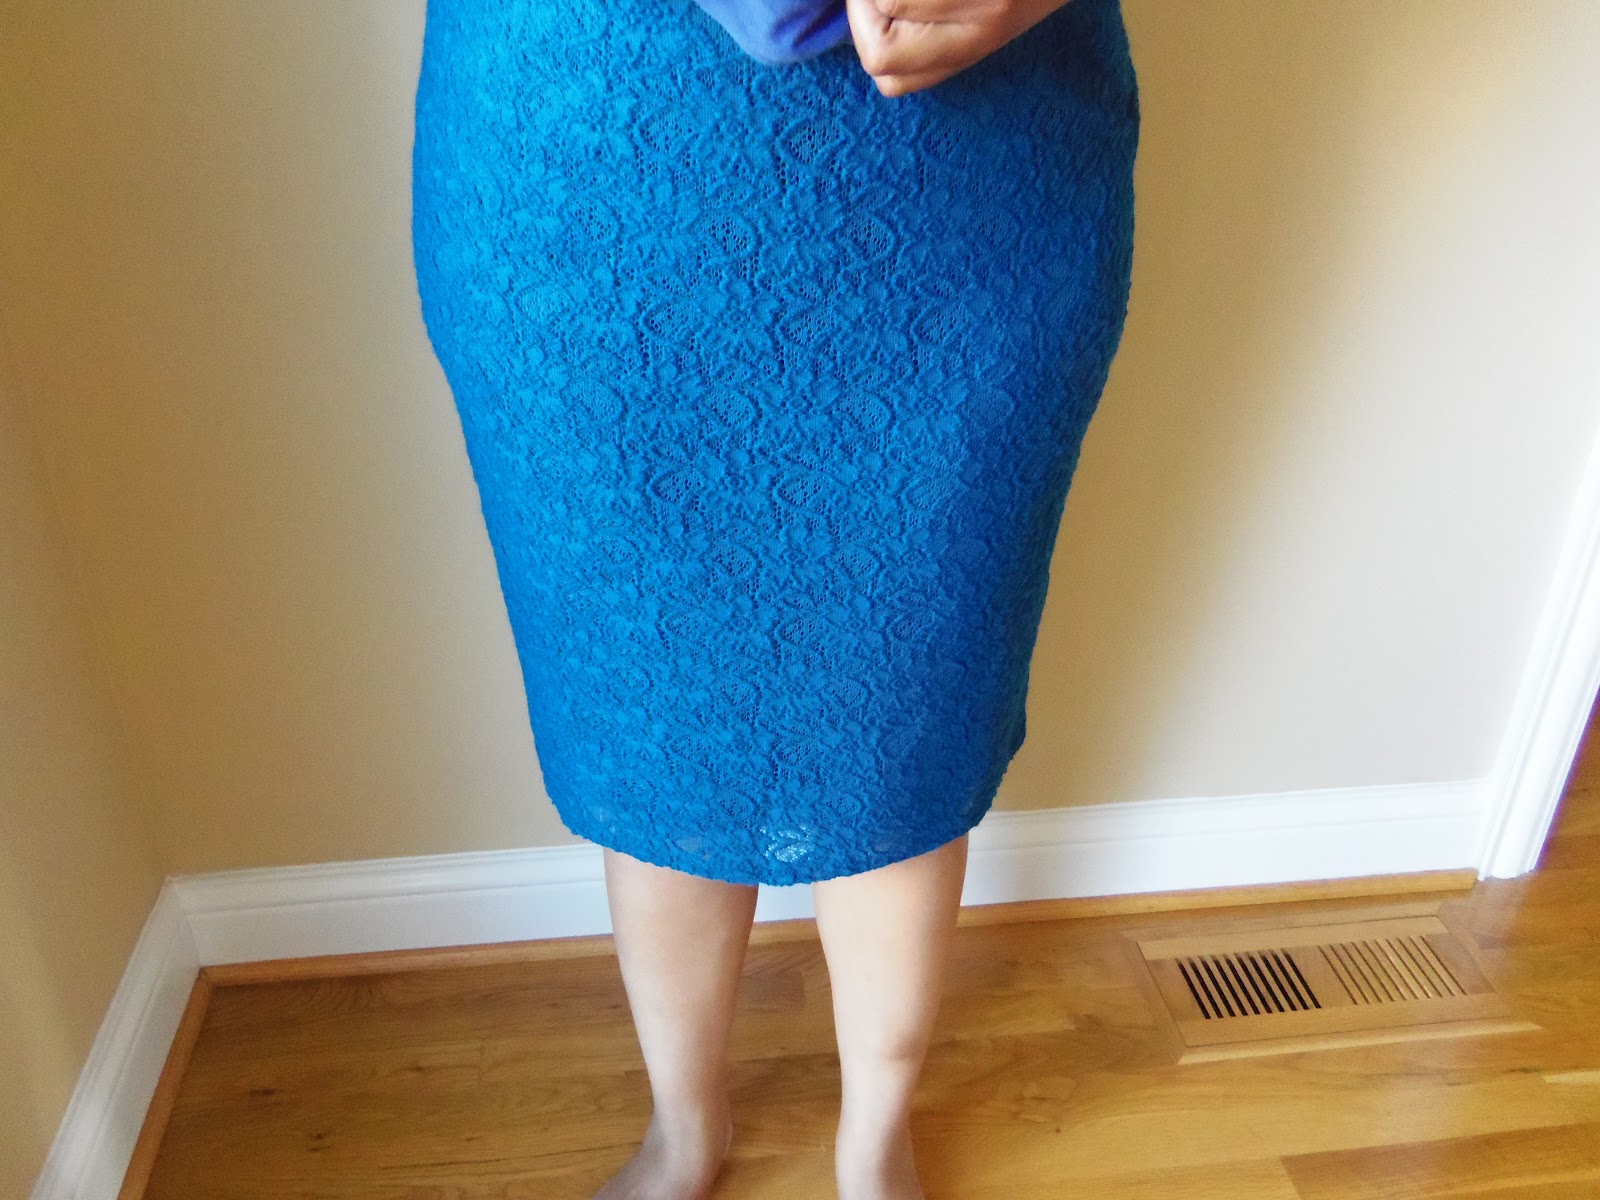 Anthropologie Lapis Lace Pencil Skirt and a Question - Really Rynetta